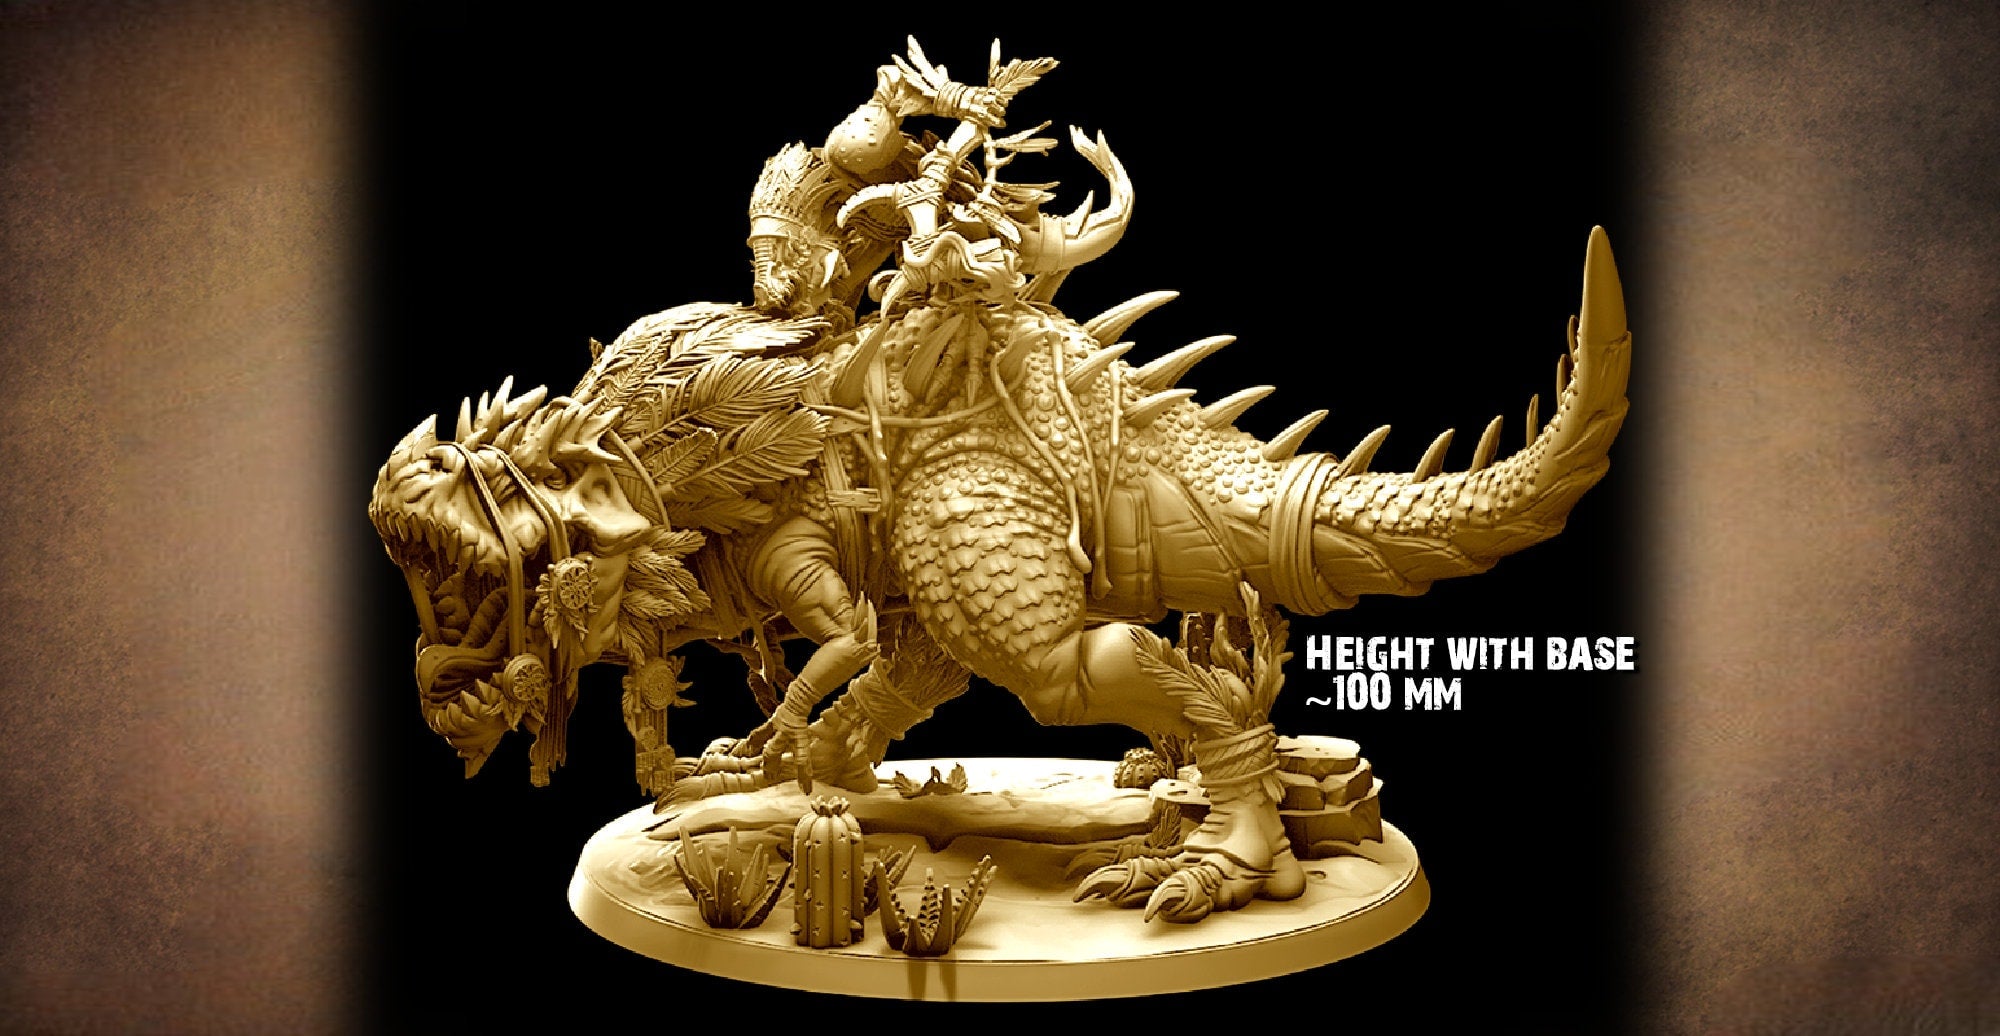 Saurian Lizardmen "Hehak, The Gatherer" | 8K 3D Print | Dungeons and Dragons | DnD | Pathfinder | Tabletop | Hero Size | 28-32 mm-Role Playing Miniatures